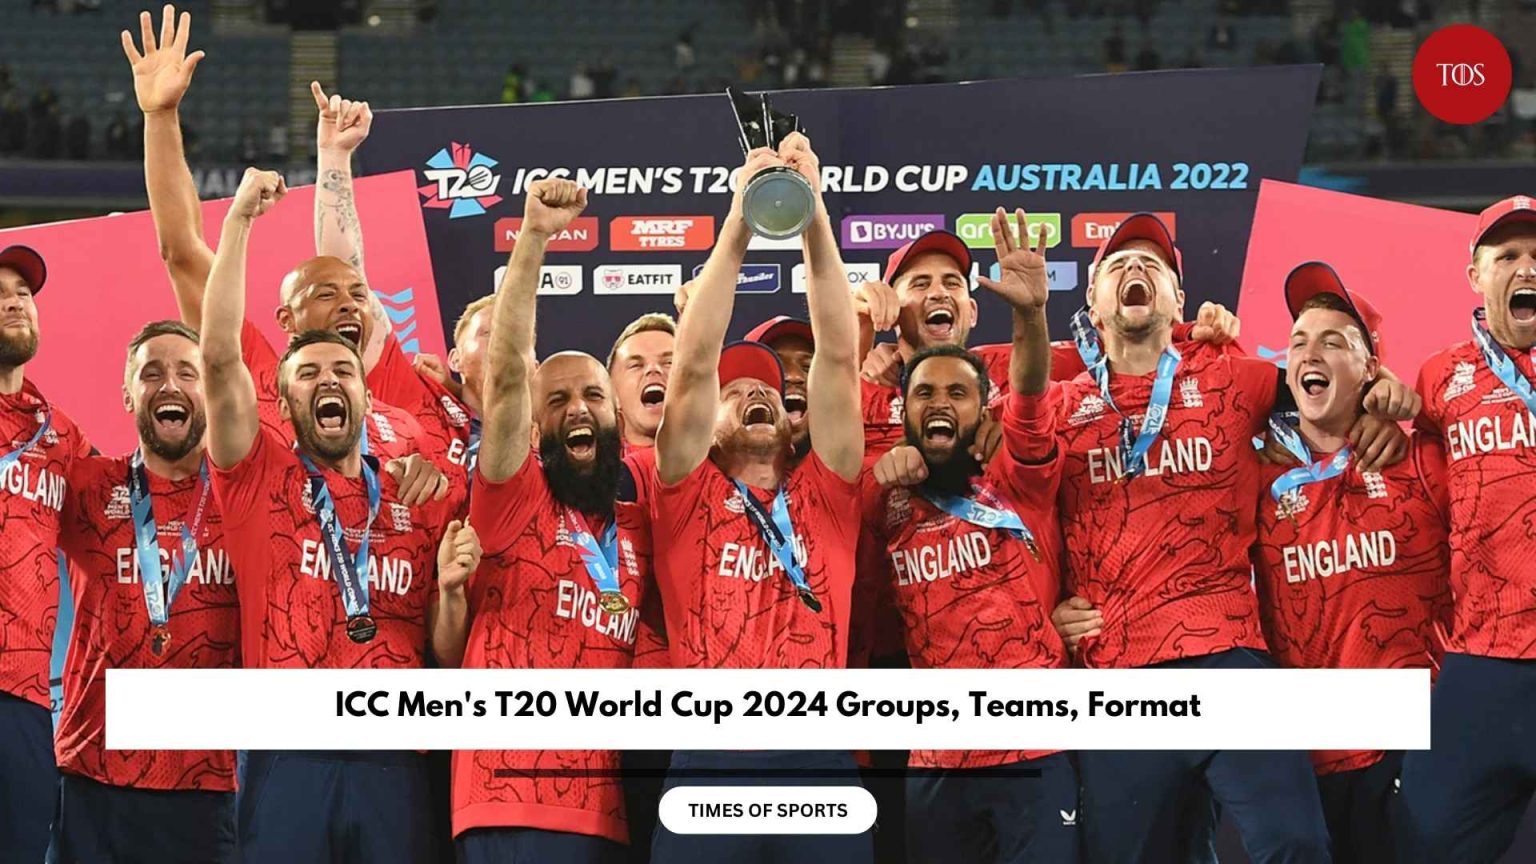 ICC Men's T20 World Cup 2024 Groups, Teams, Format